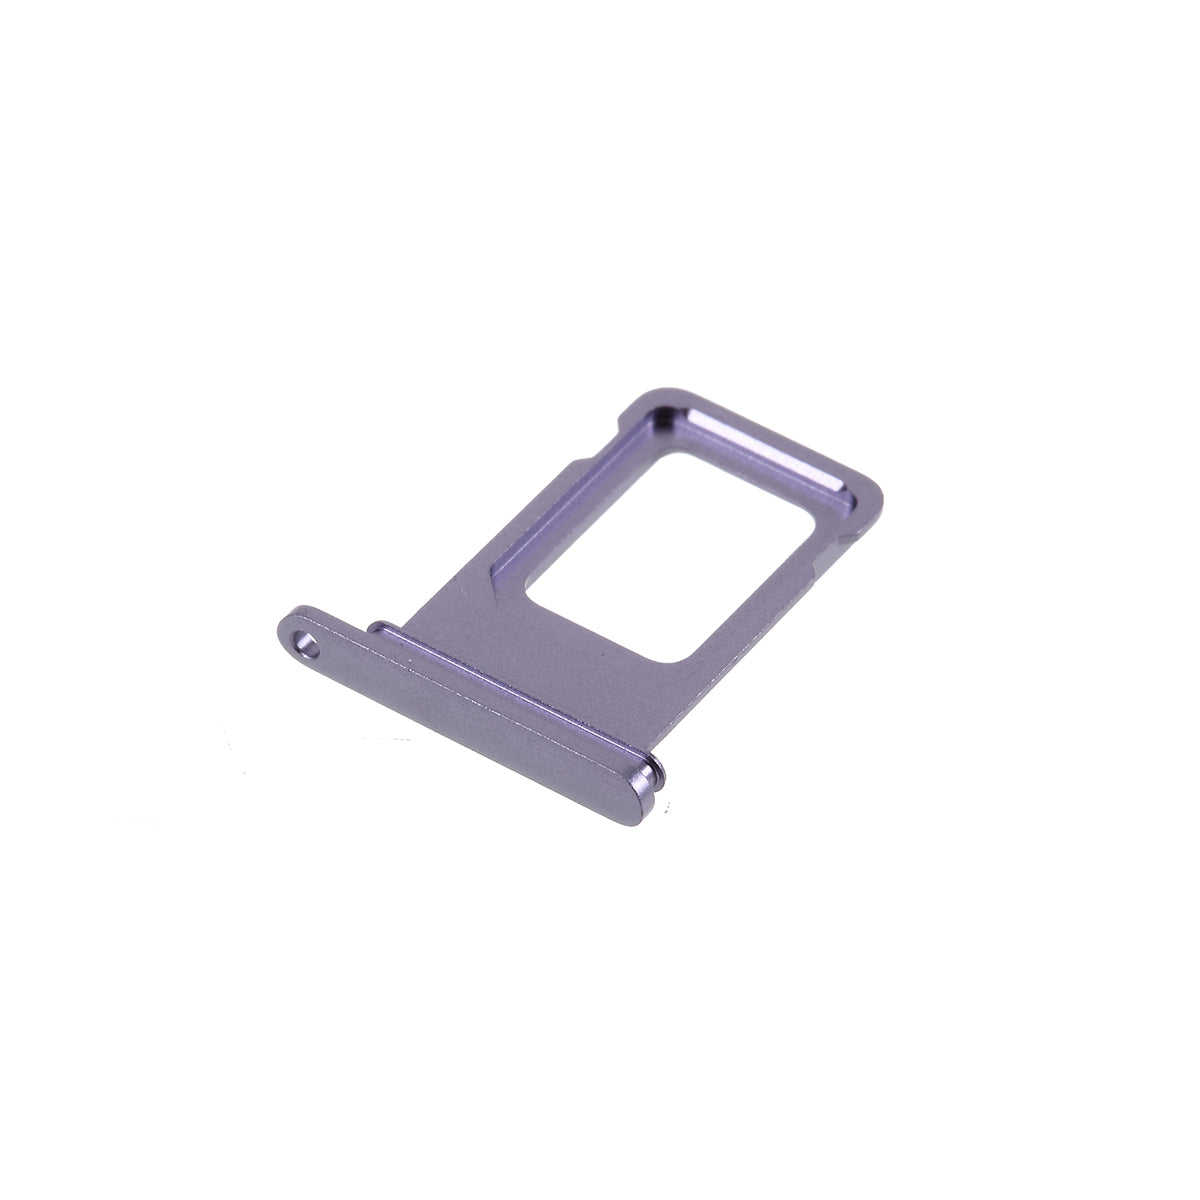 OEM SIM Card Tray Holder Replace Part for Apple iPhone 11 6.1 inch - Purple